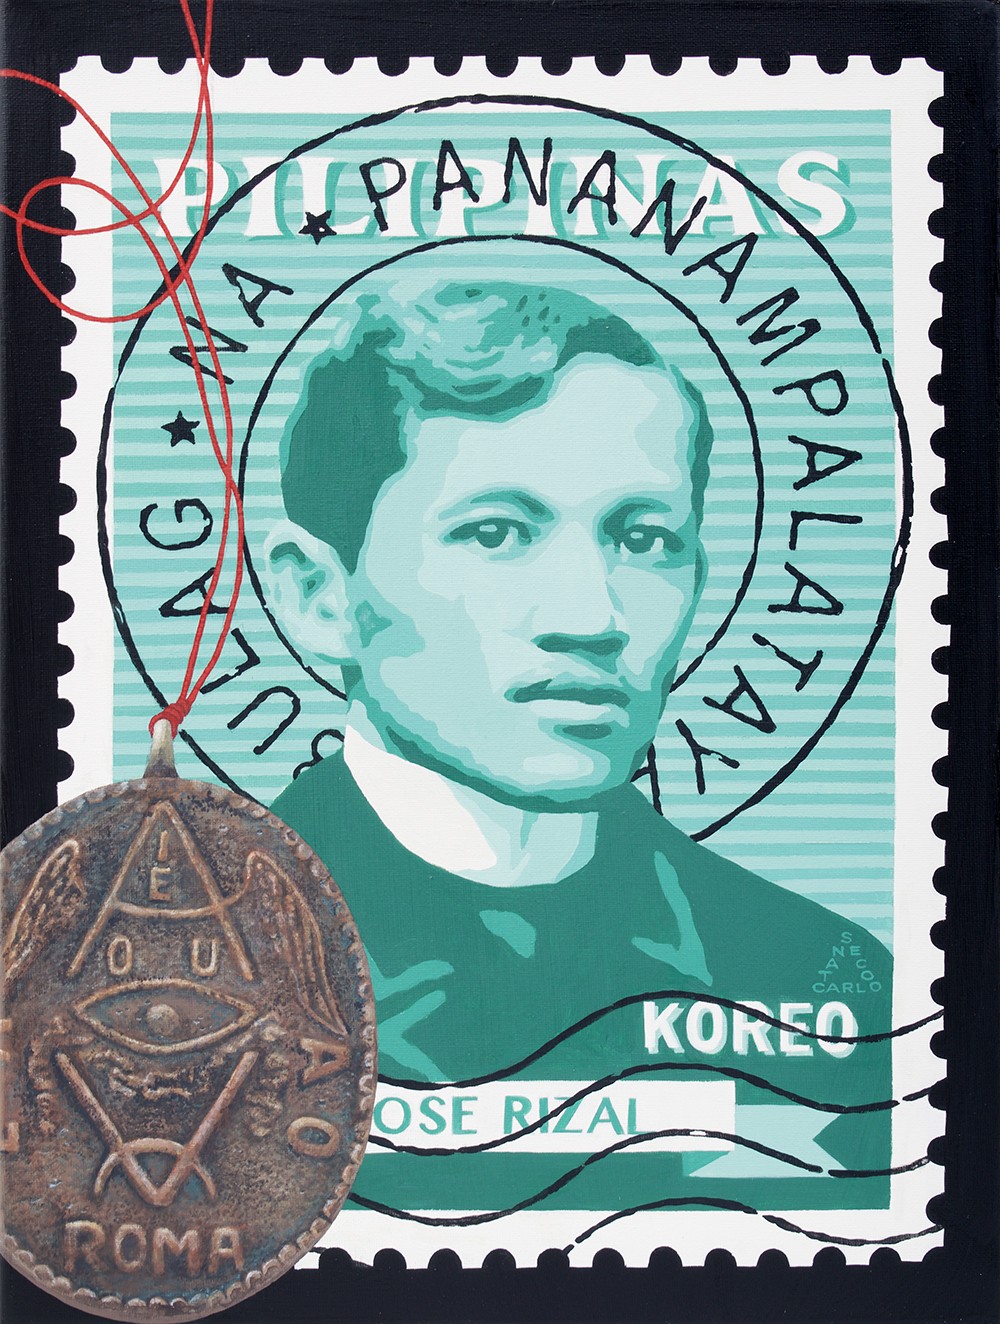 The Different Stamp Artworks by Carlo Tanseco